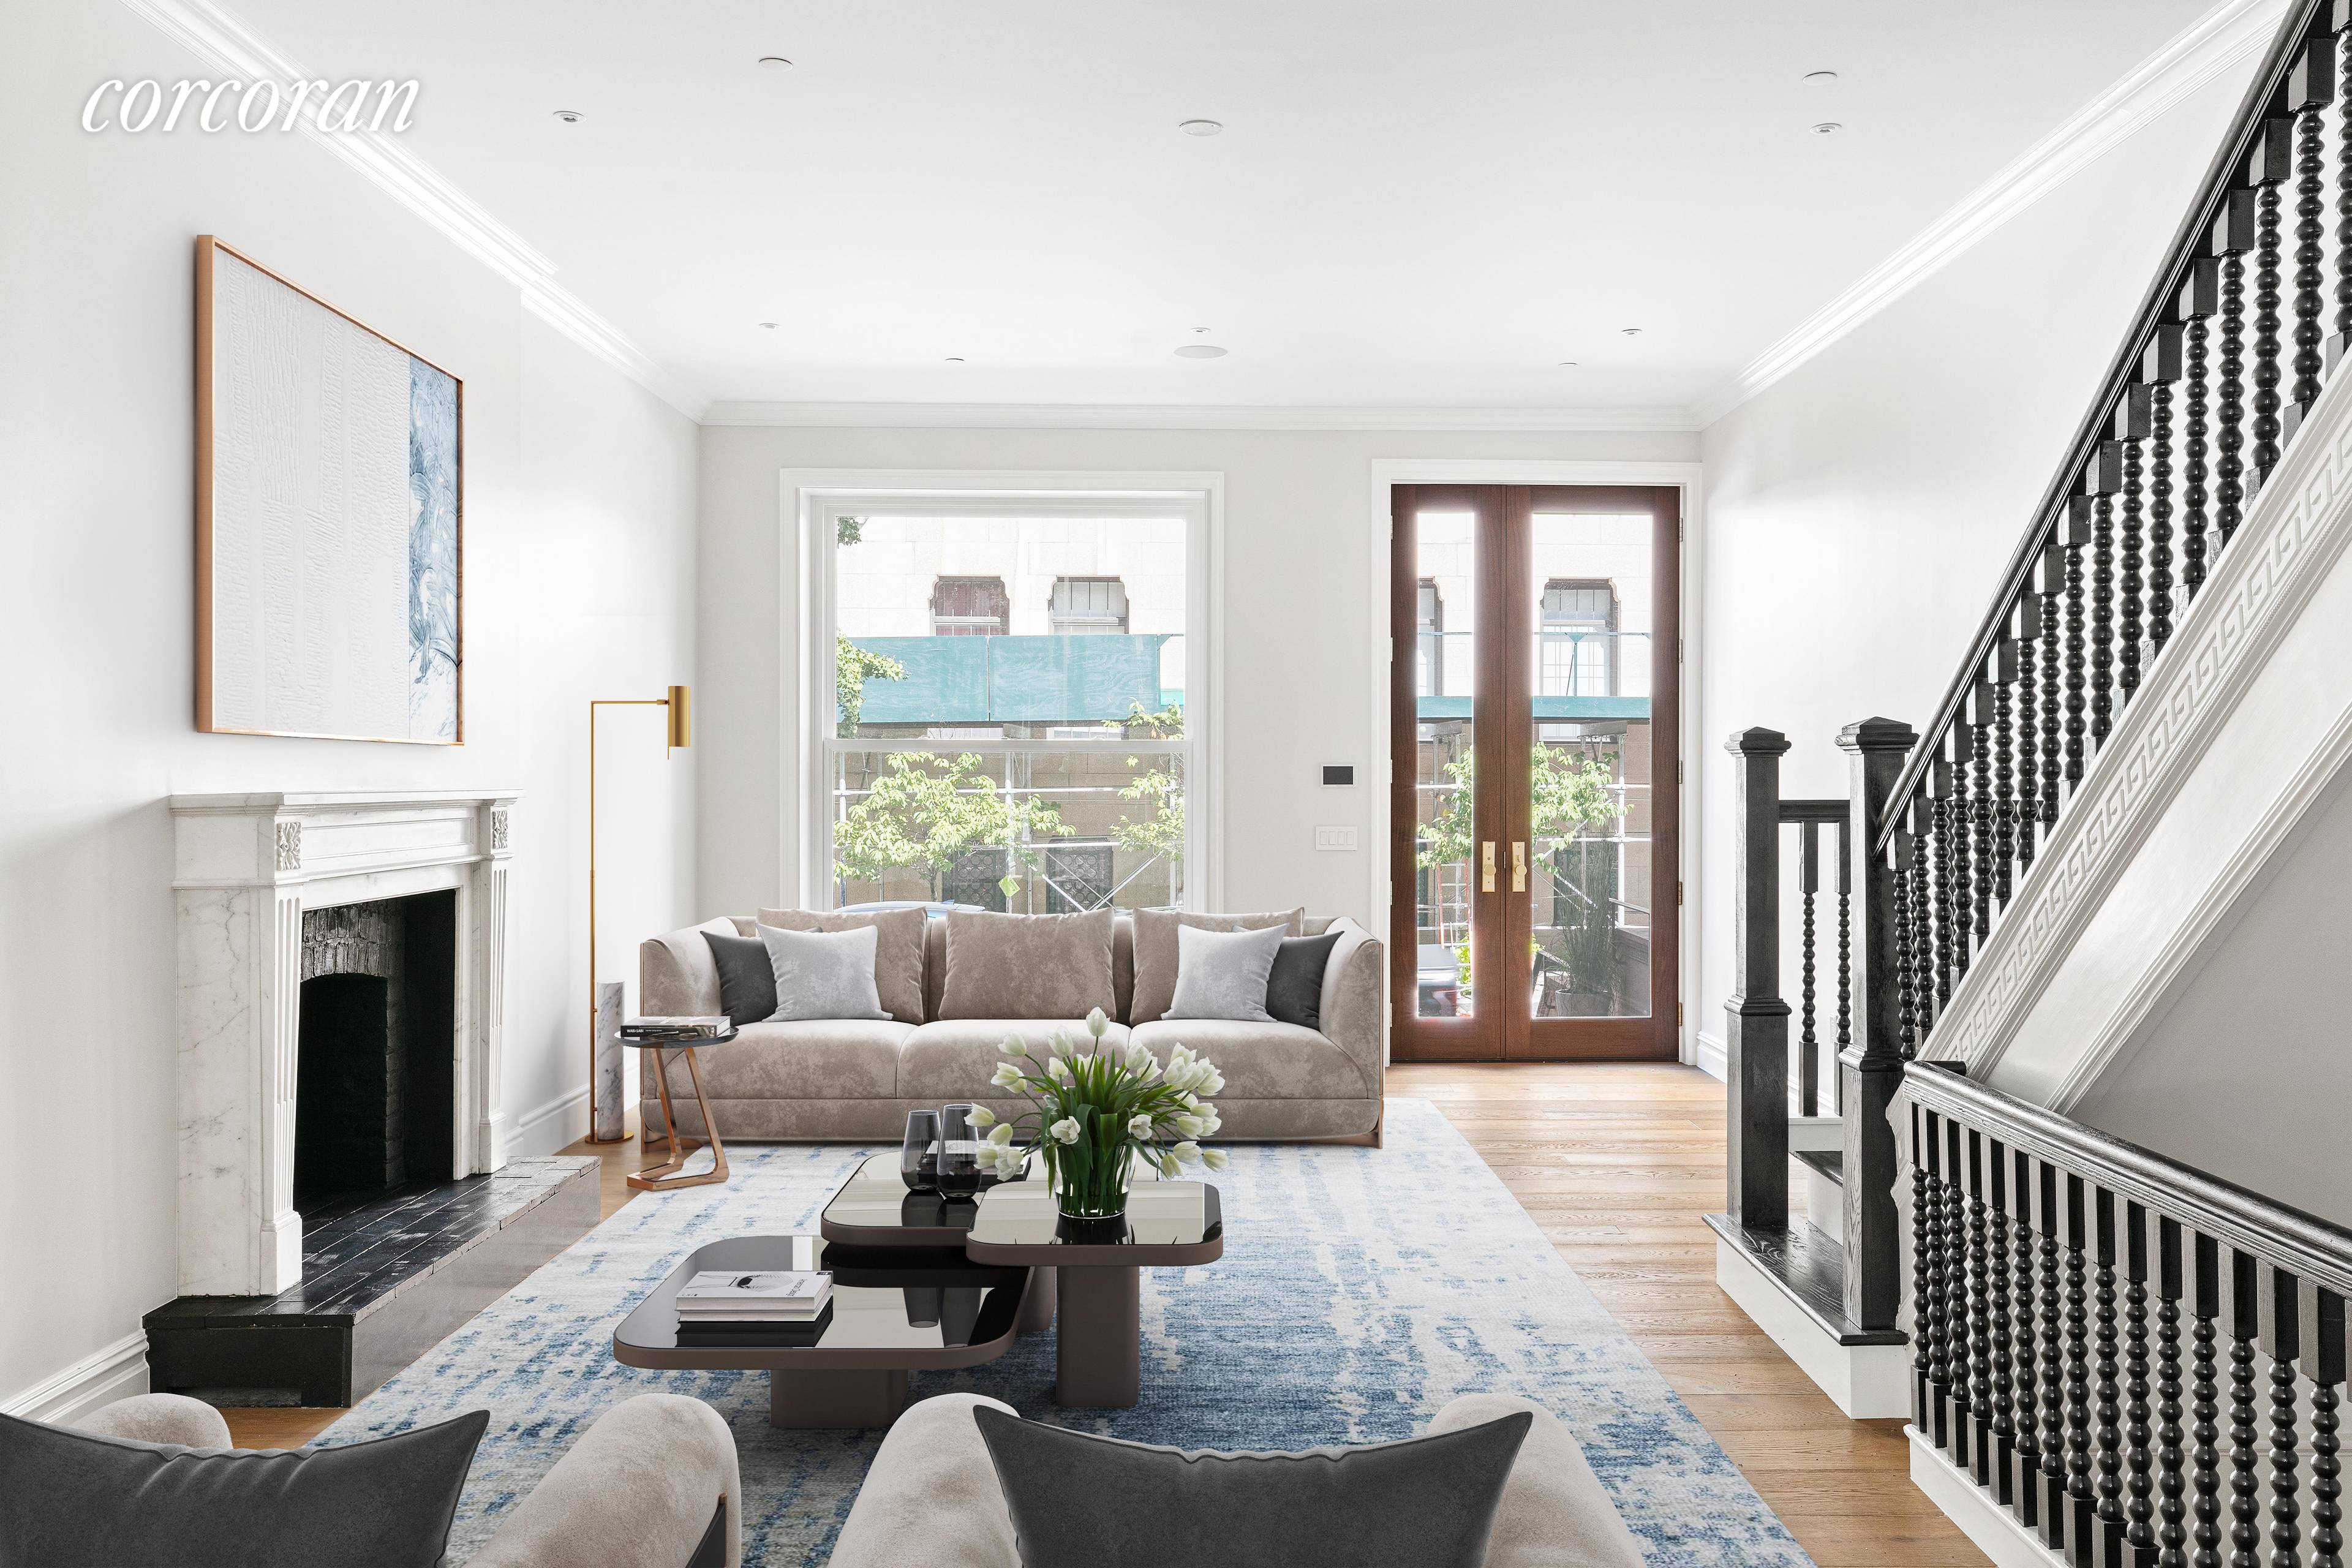 260 West 73rd Street Located in a prime area of the Upper West Side, with easy access to Central Park, Riverside Park and the 72nd Street subway, this landmarked townhouse ...